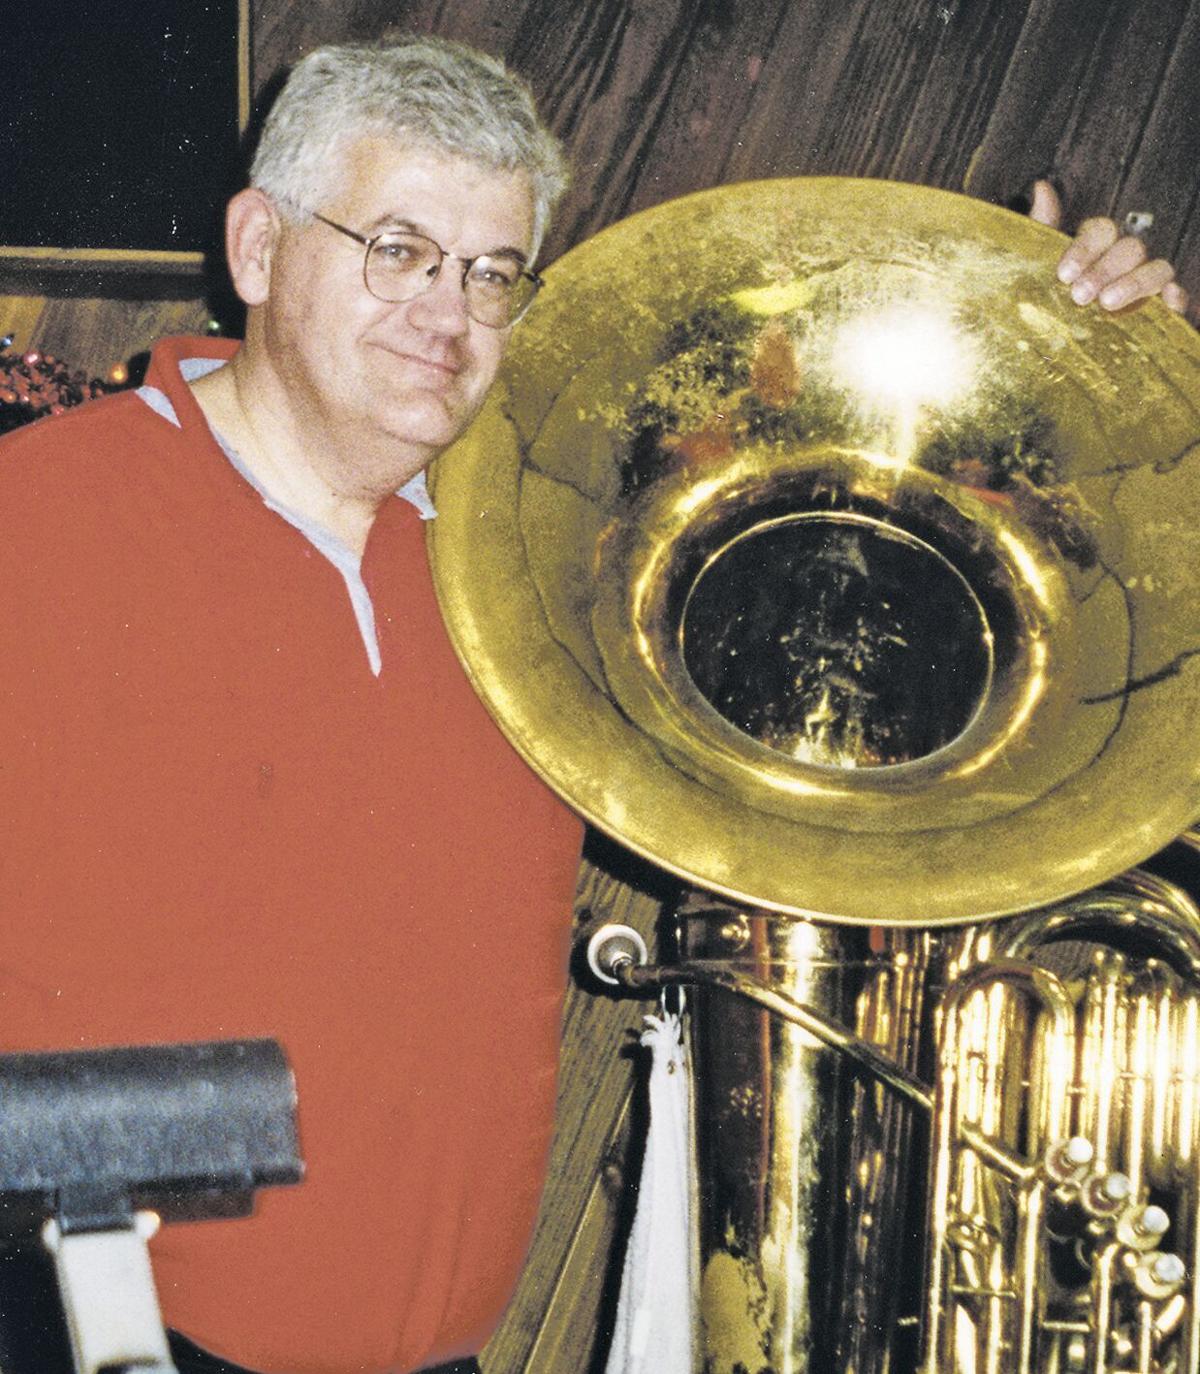 Getting to Know: A Q&A with Ripon’s Tuba Dan as he celebrates 50 years